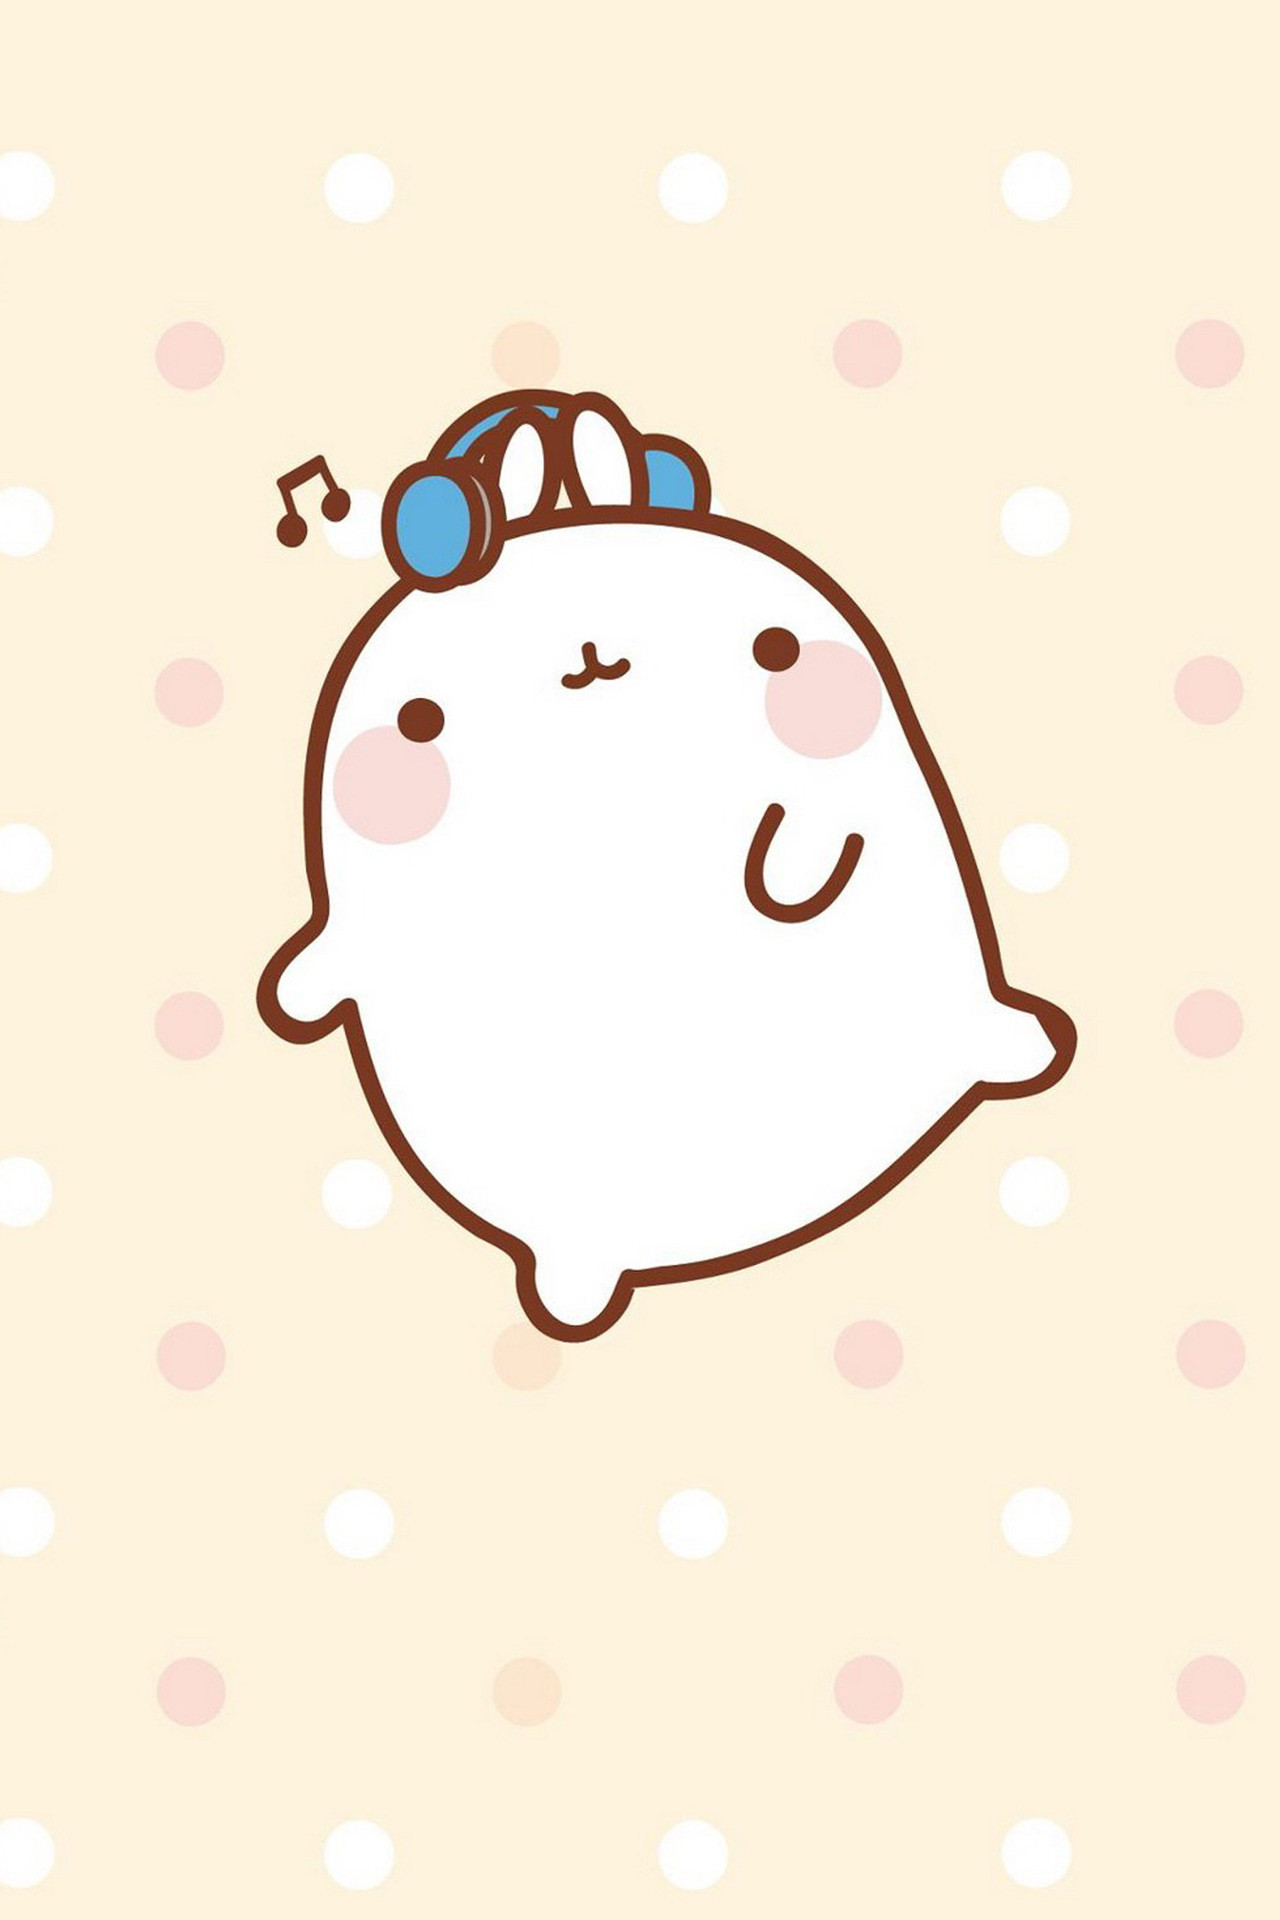 Molang Find more super cute Kawaii wallpapers for your iPhone Android